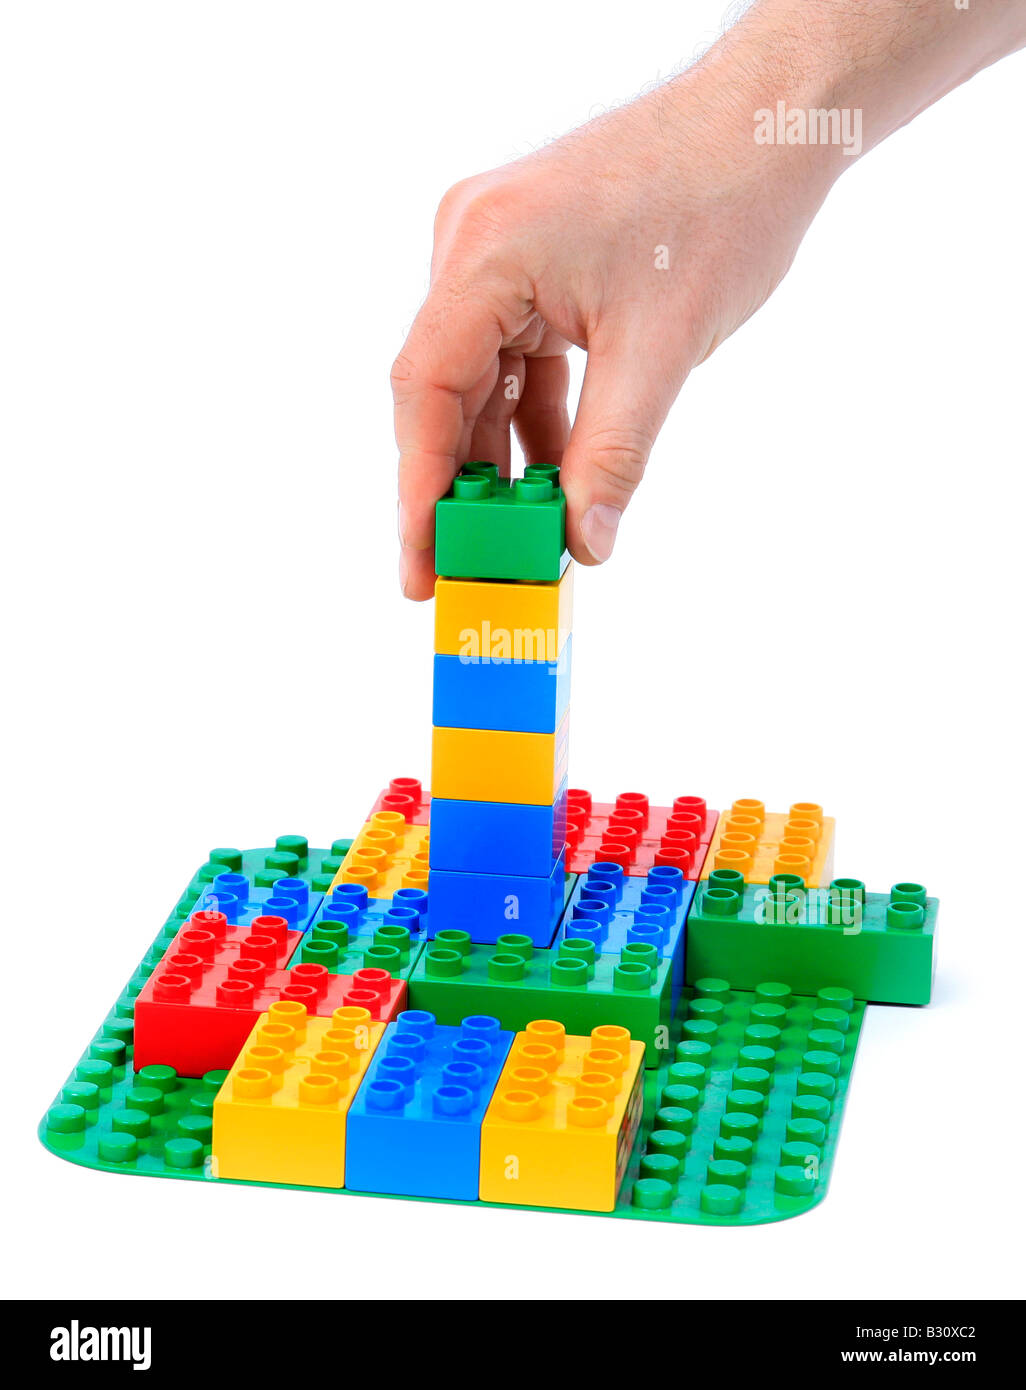 Lego Duplo Bricks In Childs Hands Stock Photo - Download Image Now